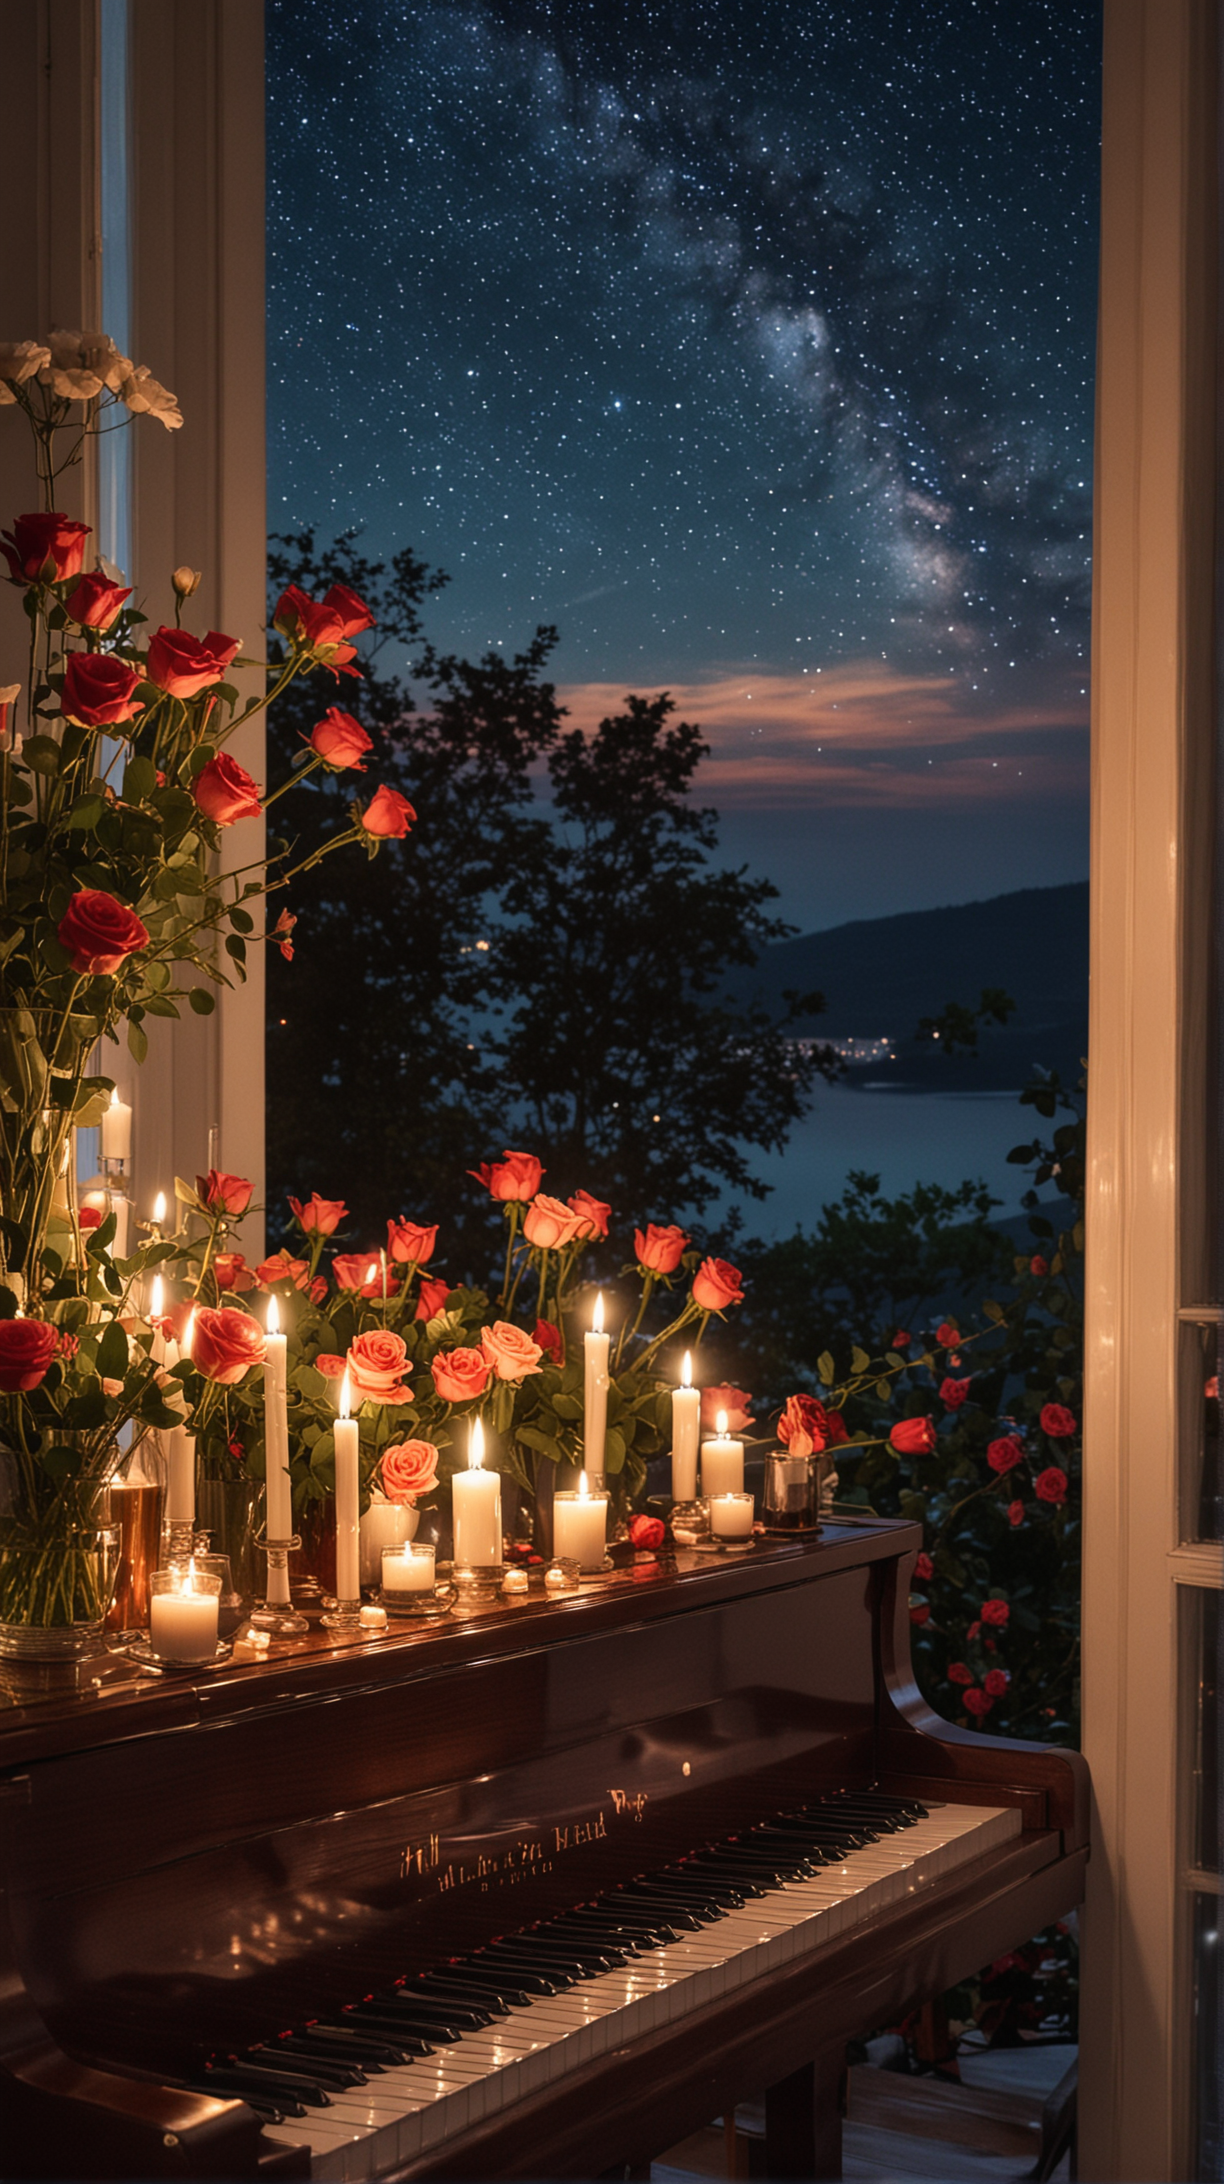 Romantic Evening Serenade with Piano and Candlelight